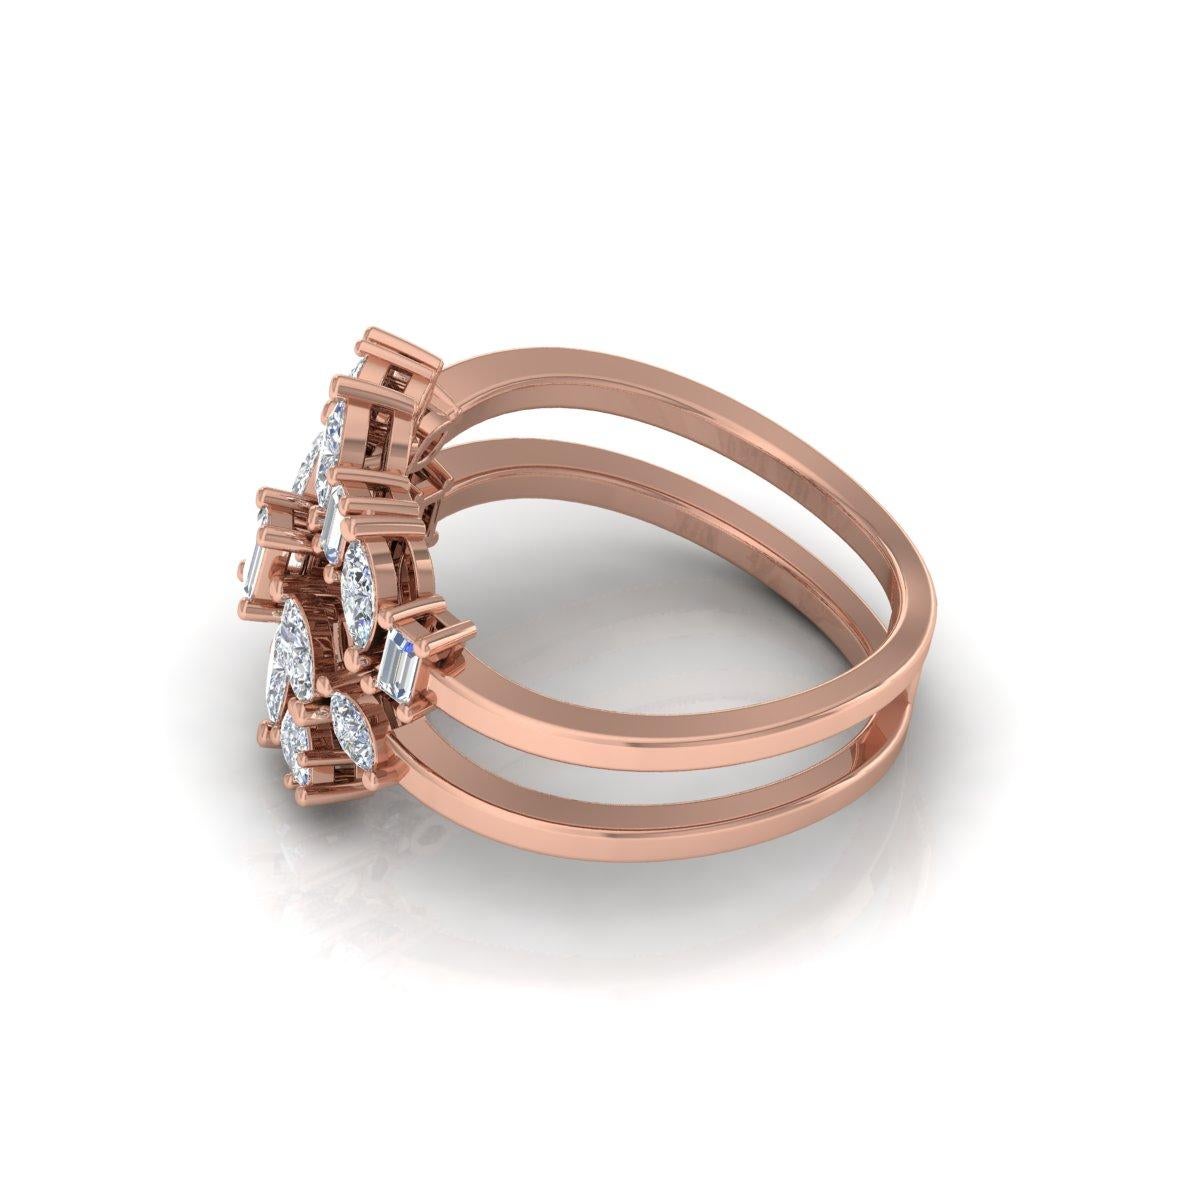 Item Code :- SER-2952E (14k)
Gross Weight :- 3.42 gm
14k Solid Rose Gold Weight :- 3.25 gm
Natural Diamond Weight :- 0.85 Carat ( AVERAGE DIAMOND CLARITY SI1-SI2 & COLOR H-I )
Ring Size :- 7 US & All ring size available

✦